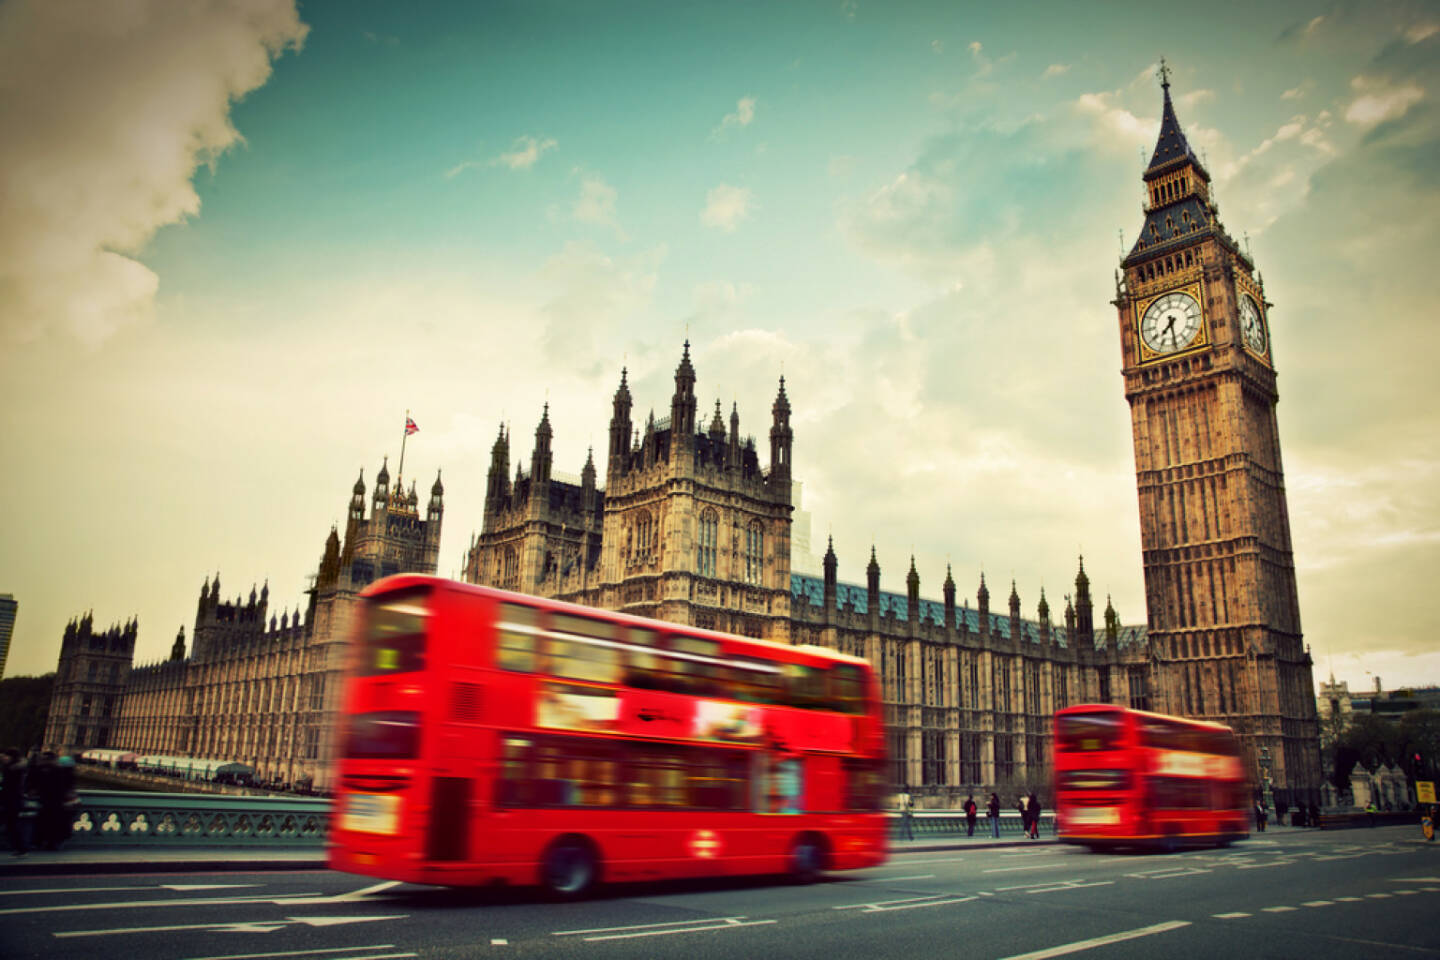 London, Big Ben, Westminster, Doppeldecker Bus, Bus, http://www.shutterstock.com/de/pic-139999093/stock-photo-london-the-uk-red-bus-in-motion-and-big-ben-the-palace-of-westminster-the-icons-of-england-in.html , 